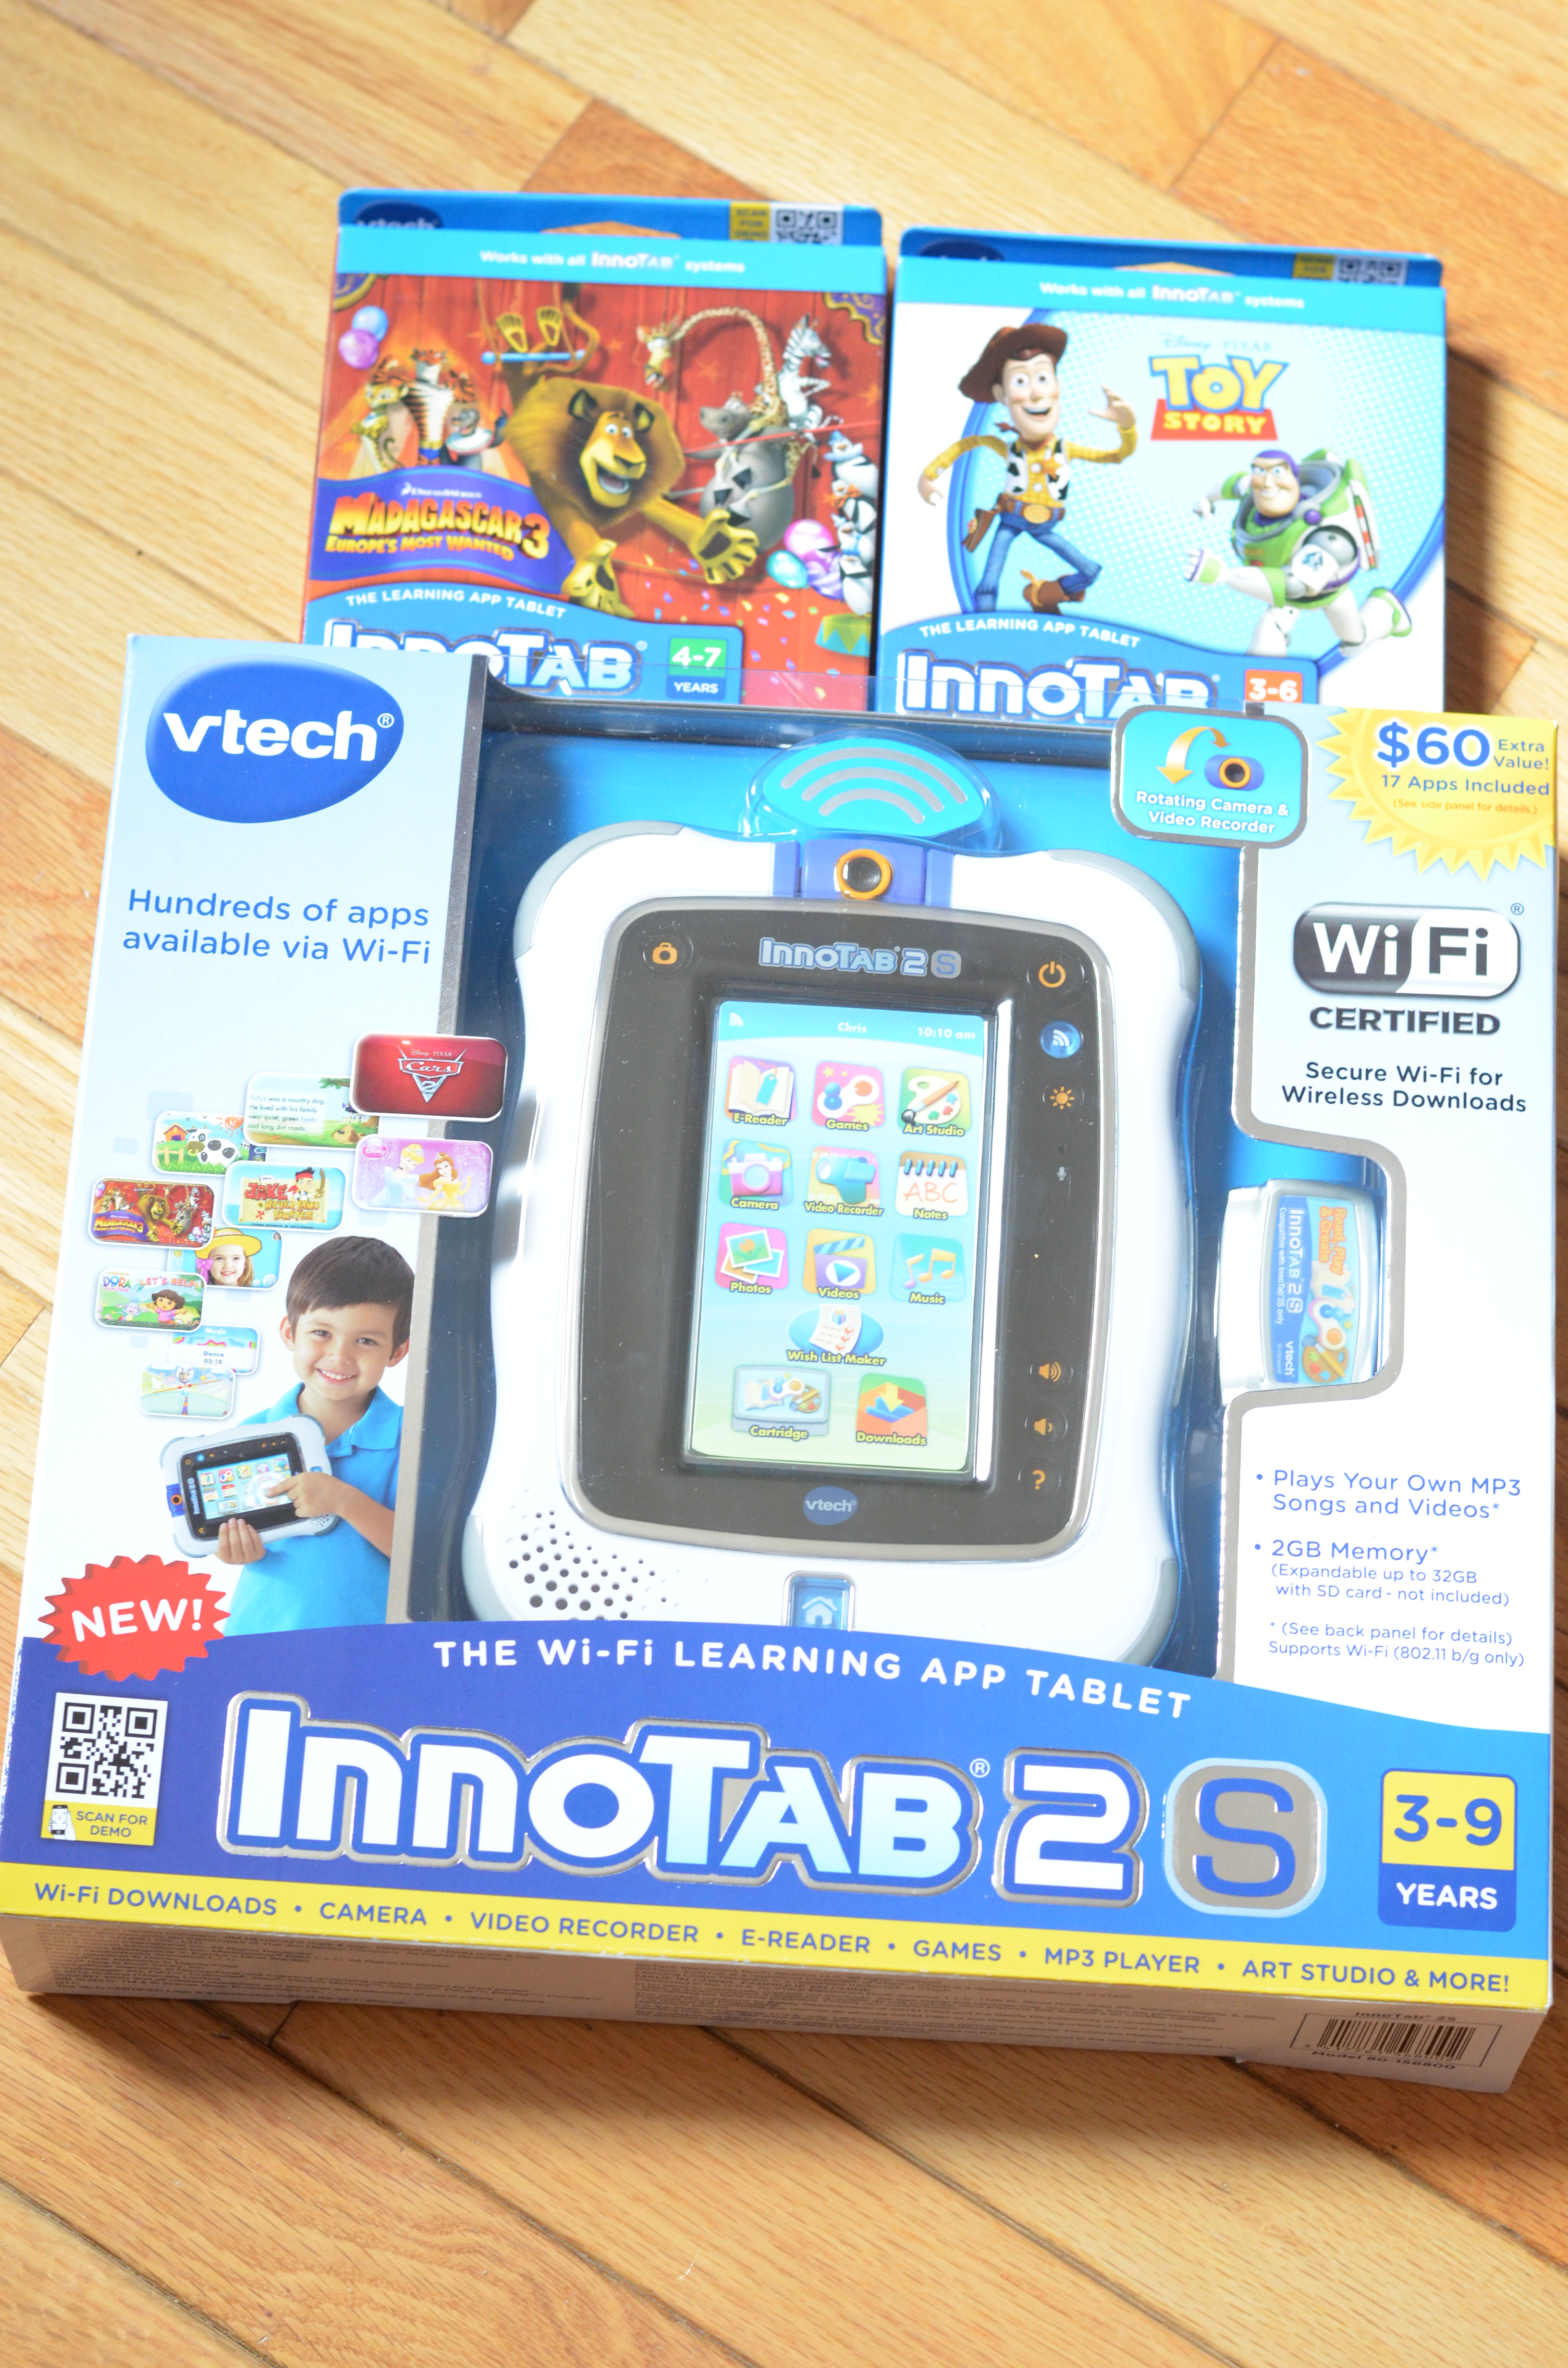 Vtech Innotab 2s Wi Fi Learning App Tablet Review Giveaway Mom Spotted